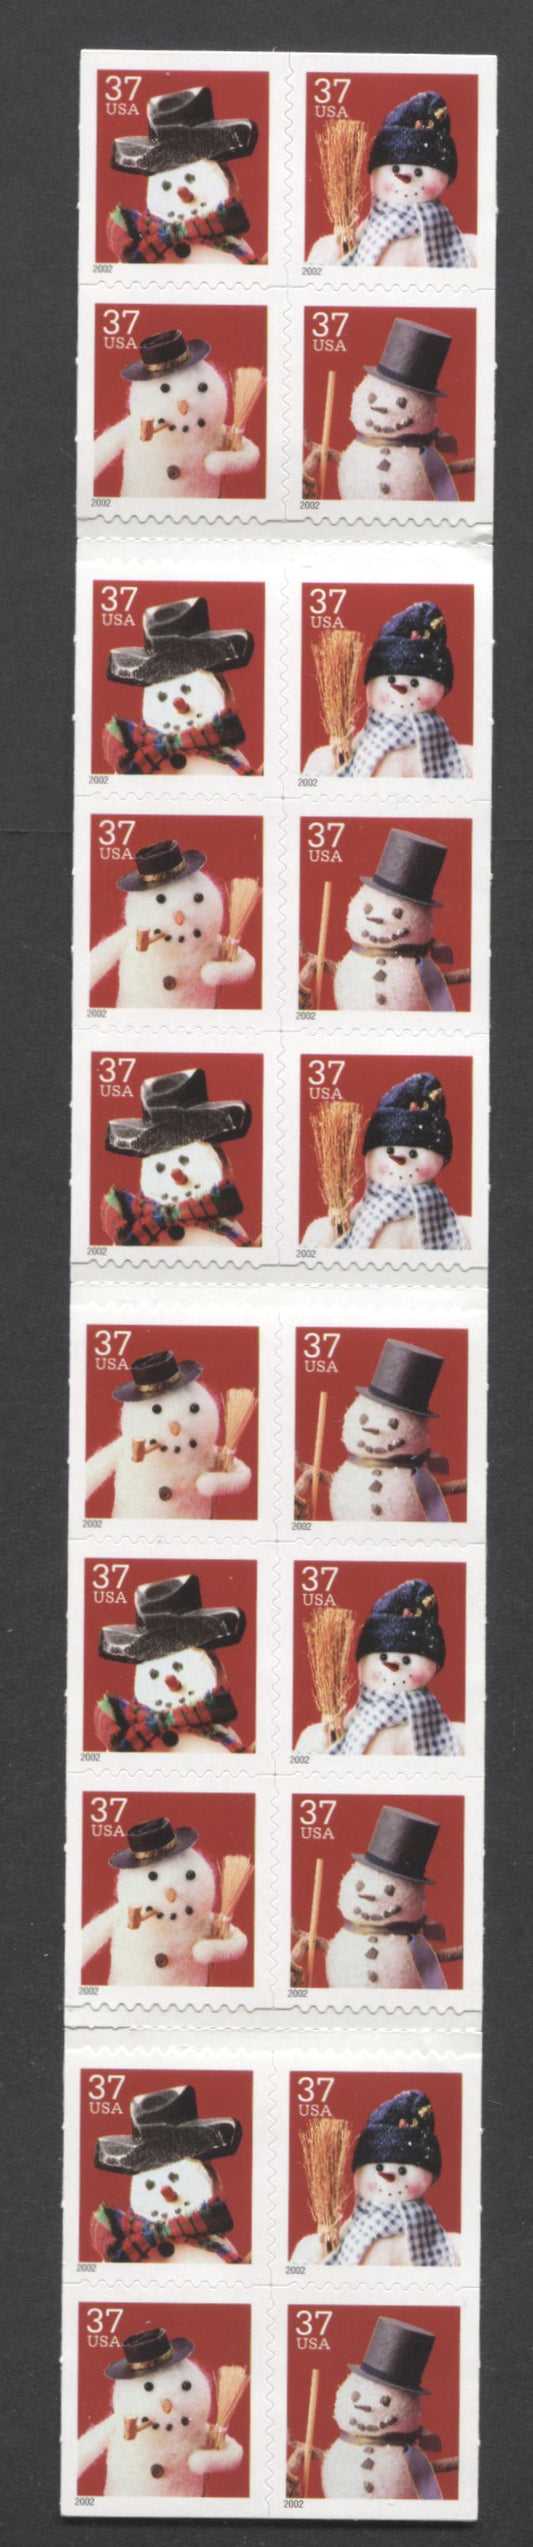 Lot 188 United States SC#3691b-d 37c Multicolored 2002 Christmas Issue, A VFNH Booklet Of 20, Click on Listing to See ALL Pictures, 2017 Scott Cat. $20